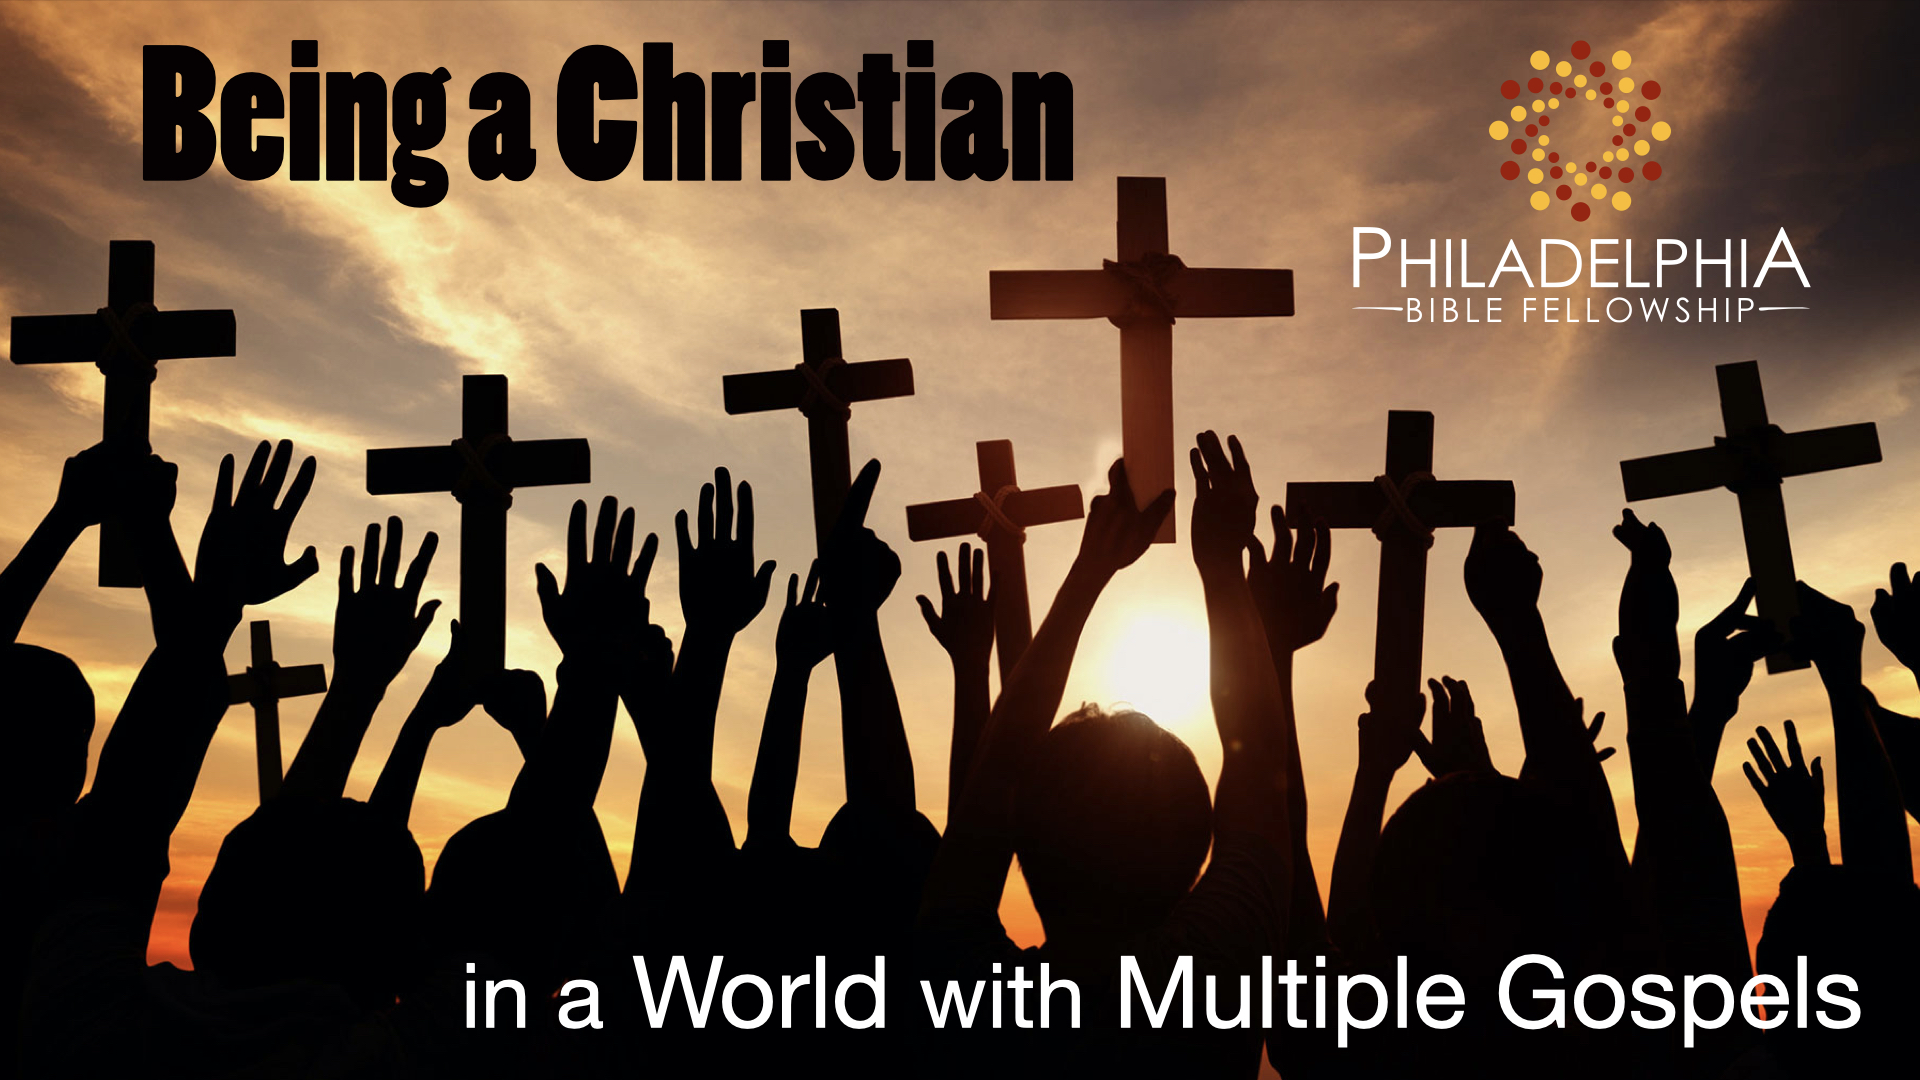 Being a Christian in a World with Multiple Gospels